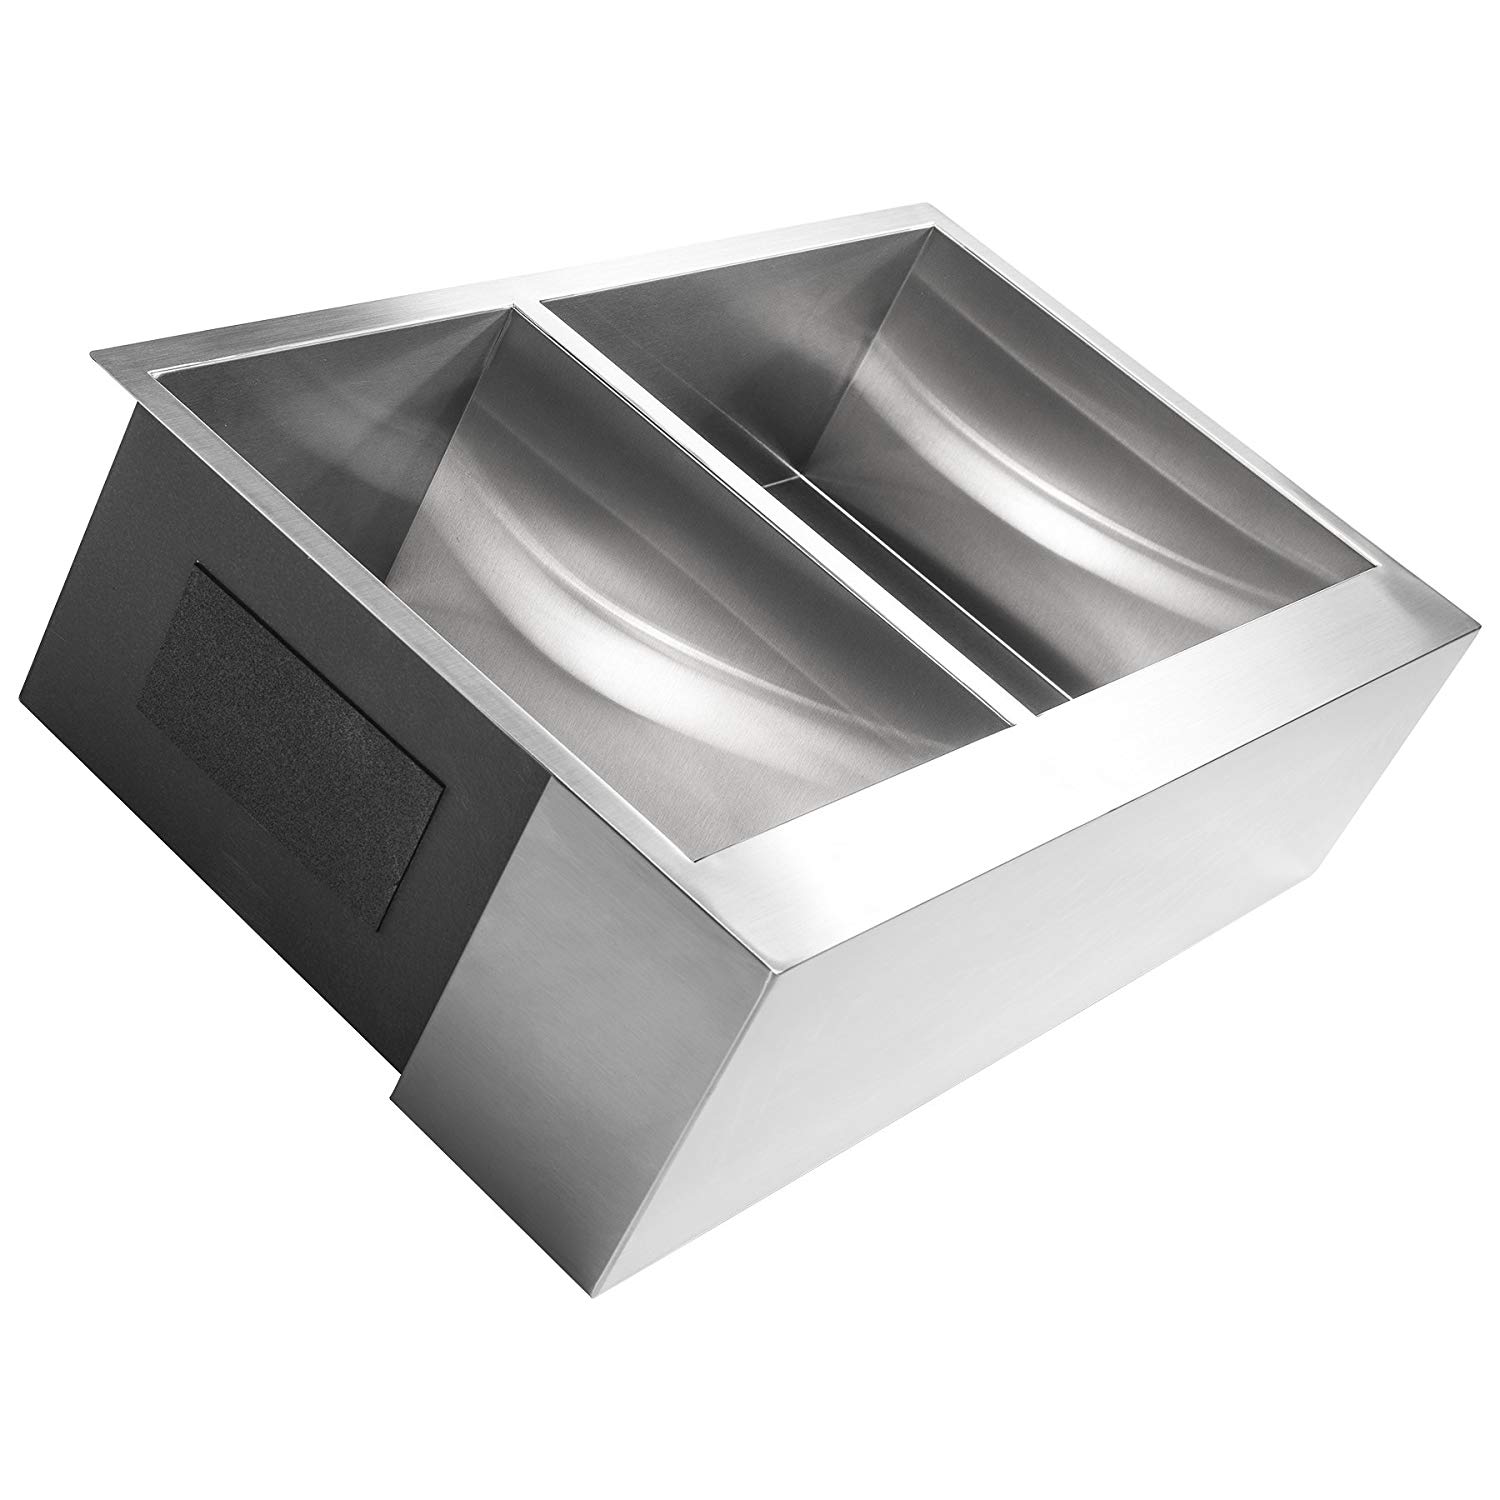 33 Inch Stainless Steel Handmade Undermount Kitchen Sink with Double Bowl